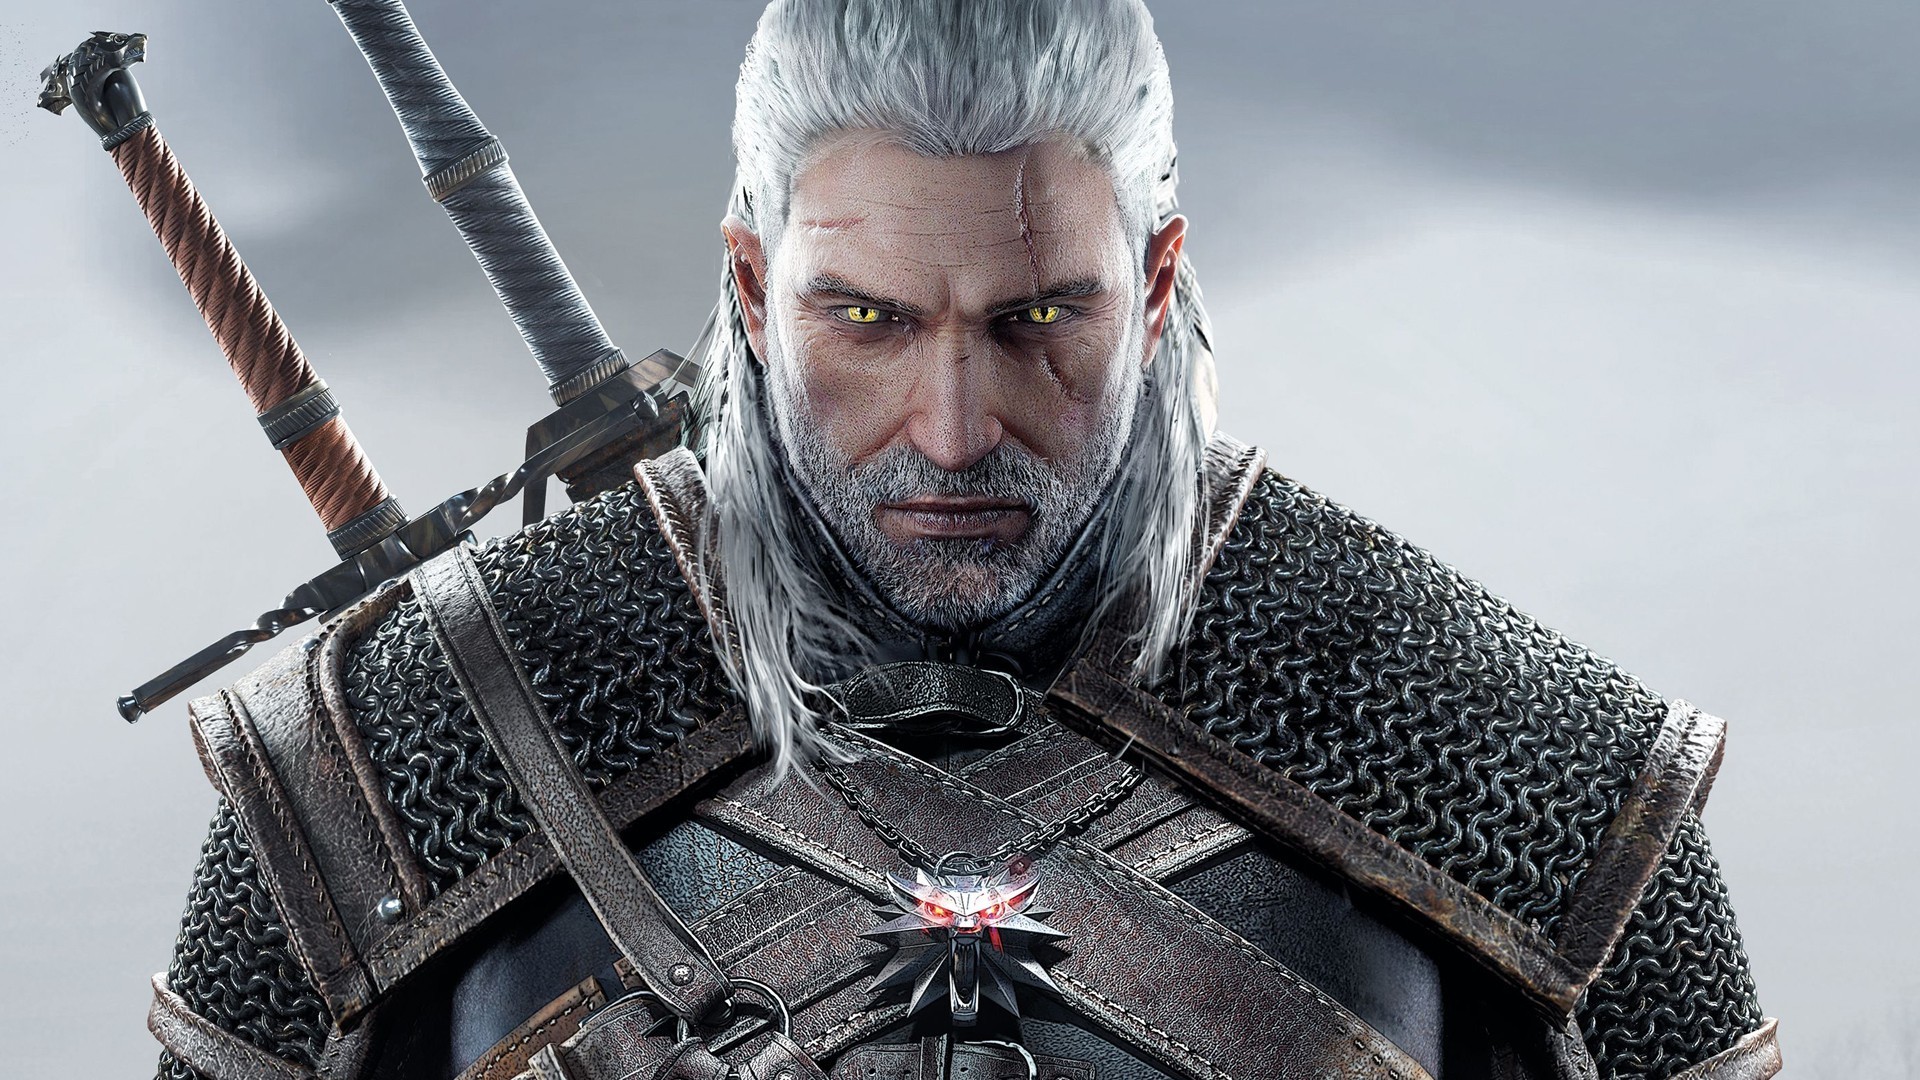 Witcher Evolution – The Witcher EE vs. The Witcher 2 EE vs. The